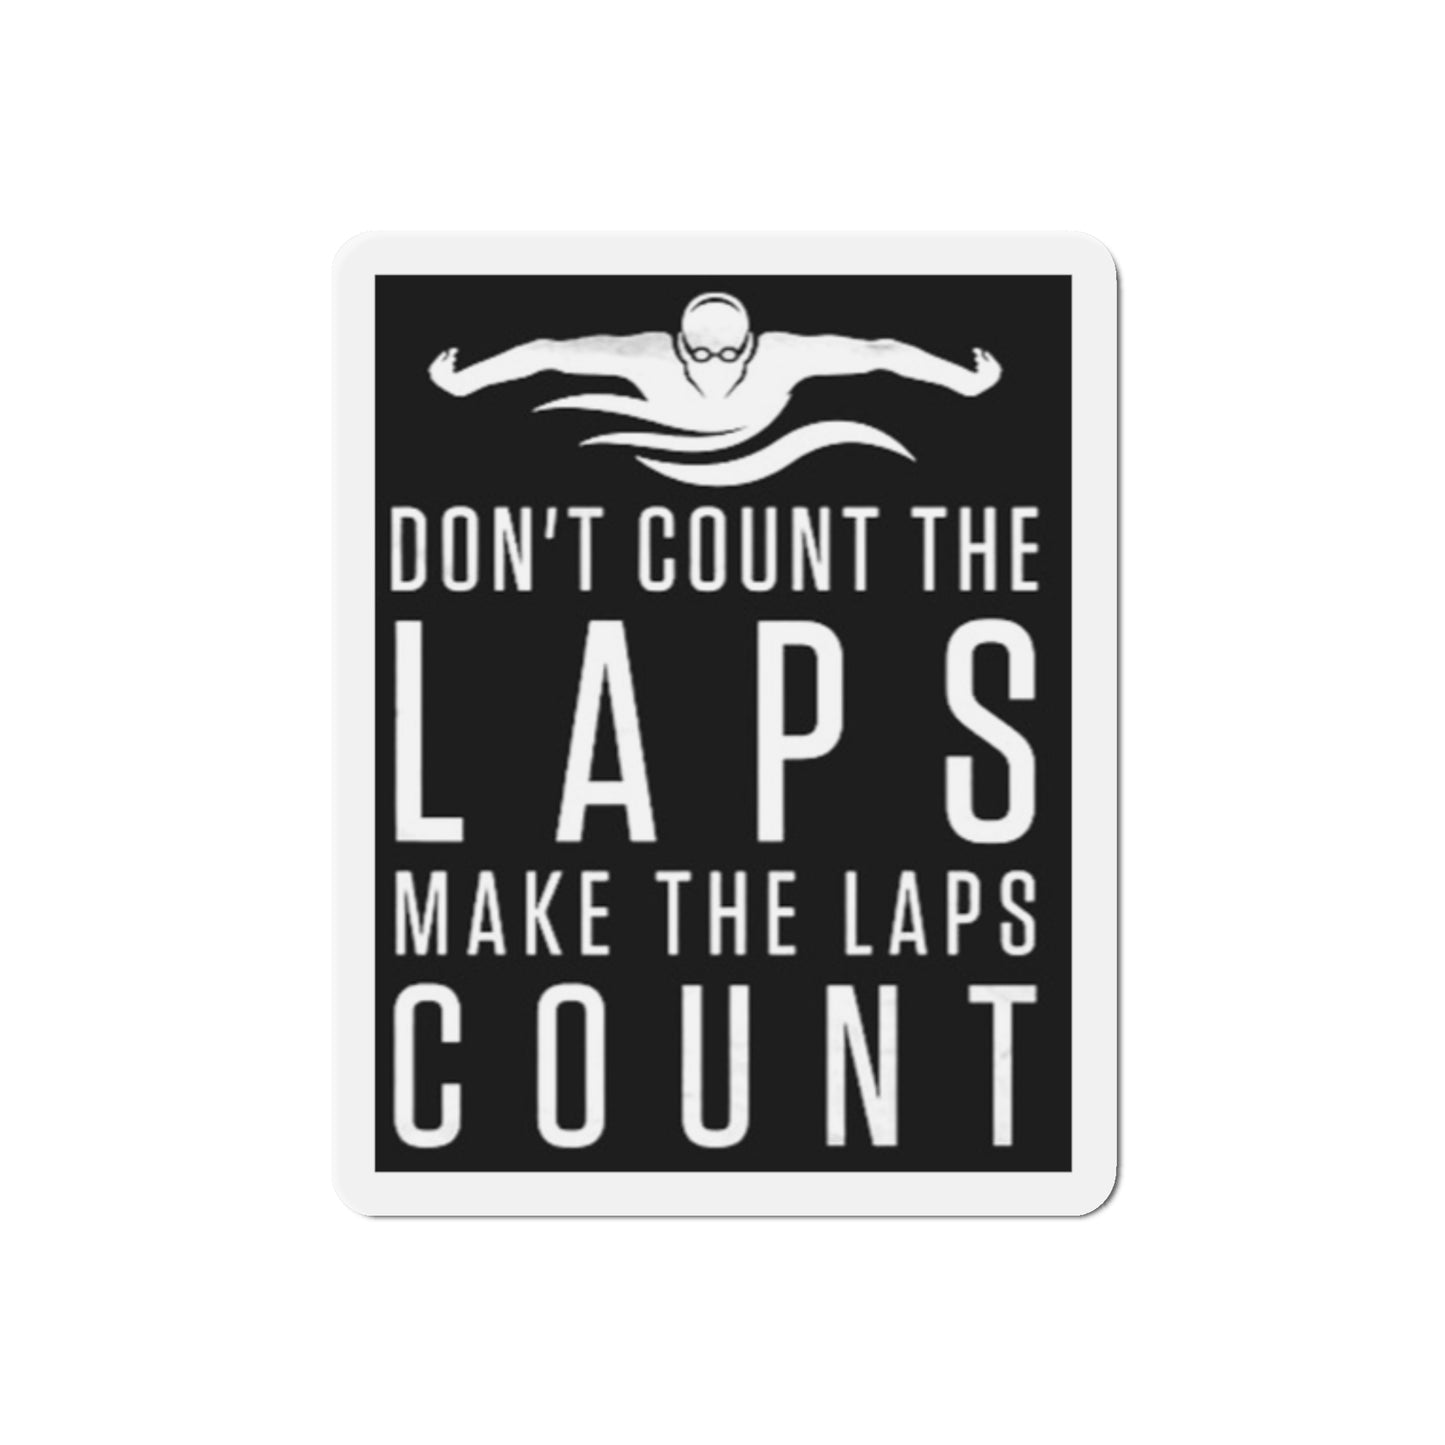 Make Your Laps Count! Die-Cut Magnets